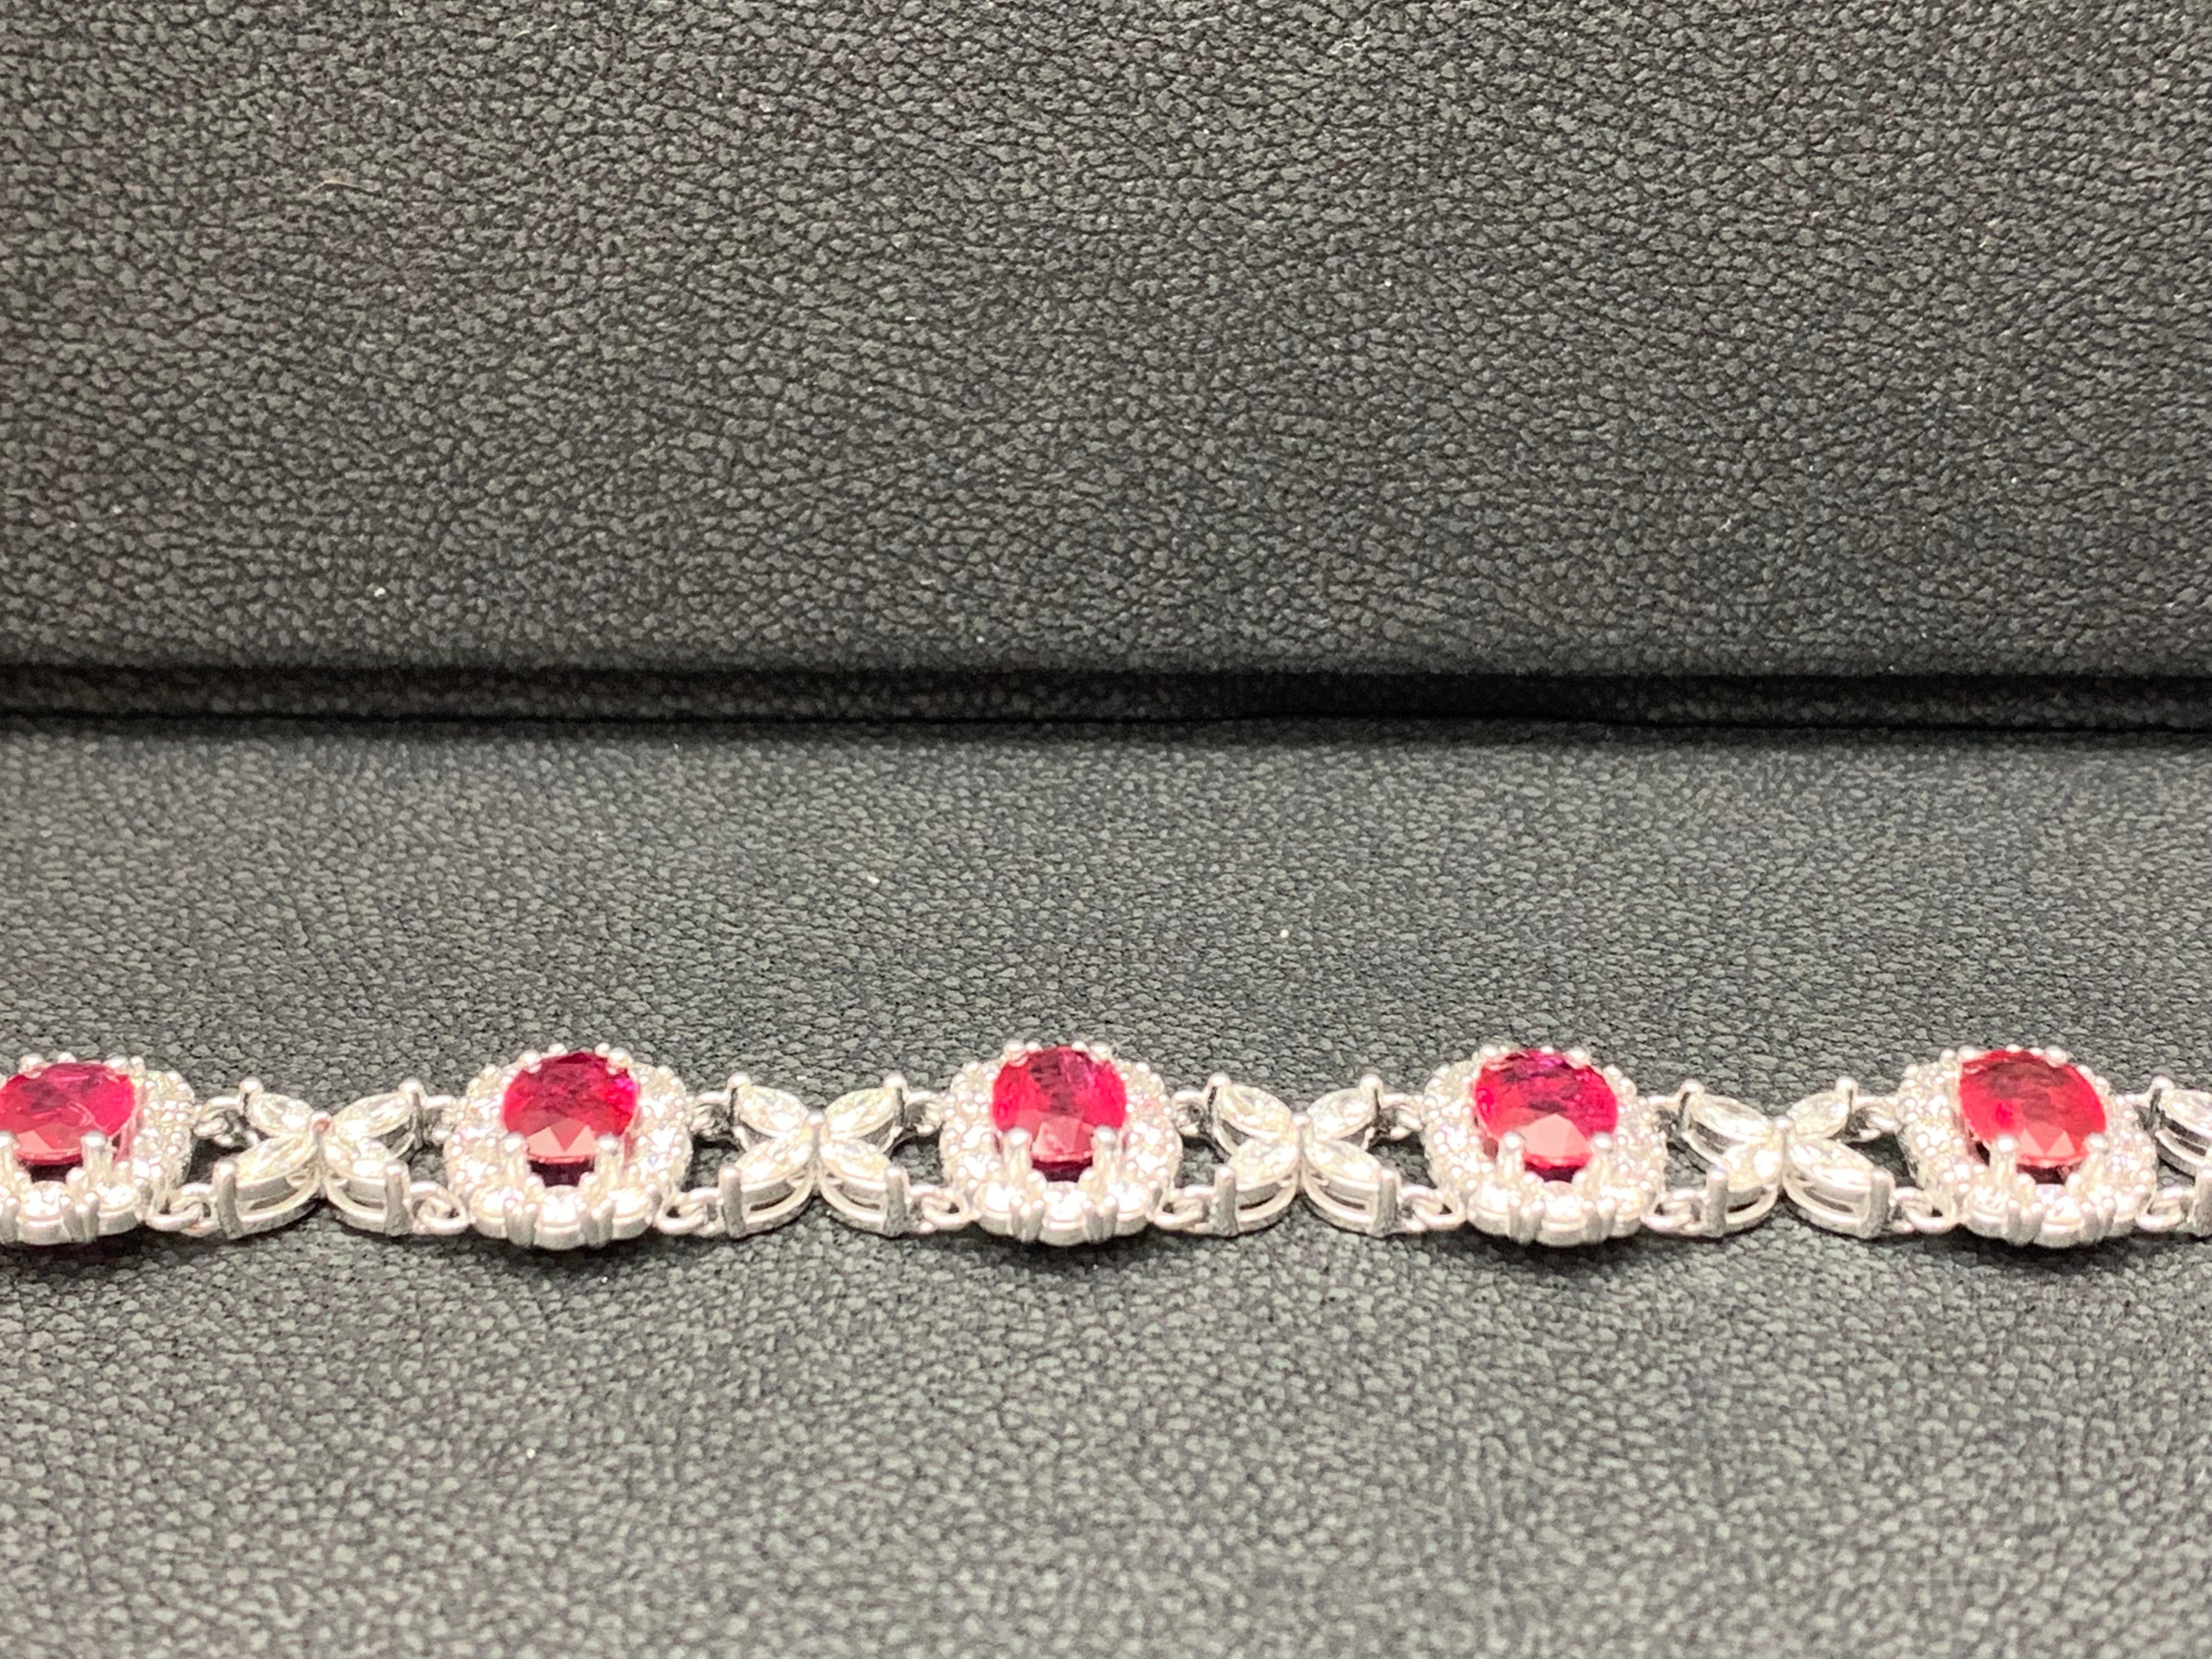 12.54 Carat Oval Cut Ruby and Diamond Tennis Bracelet in 14K White Gold For Sale 1